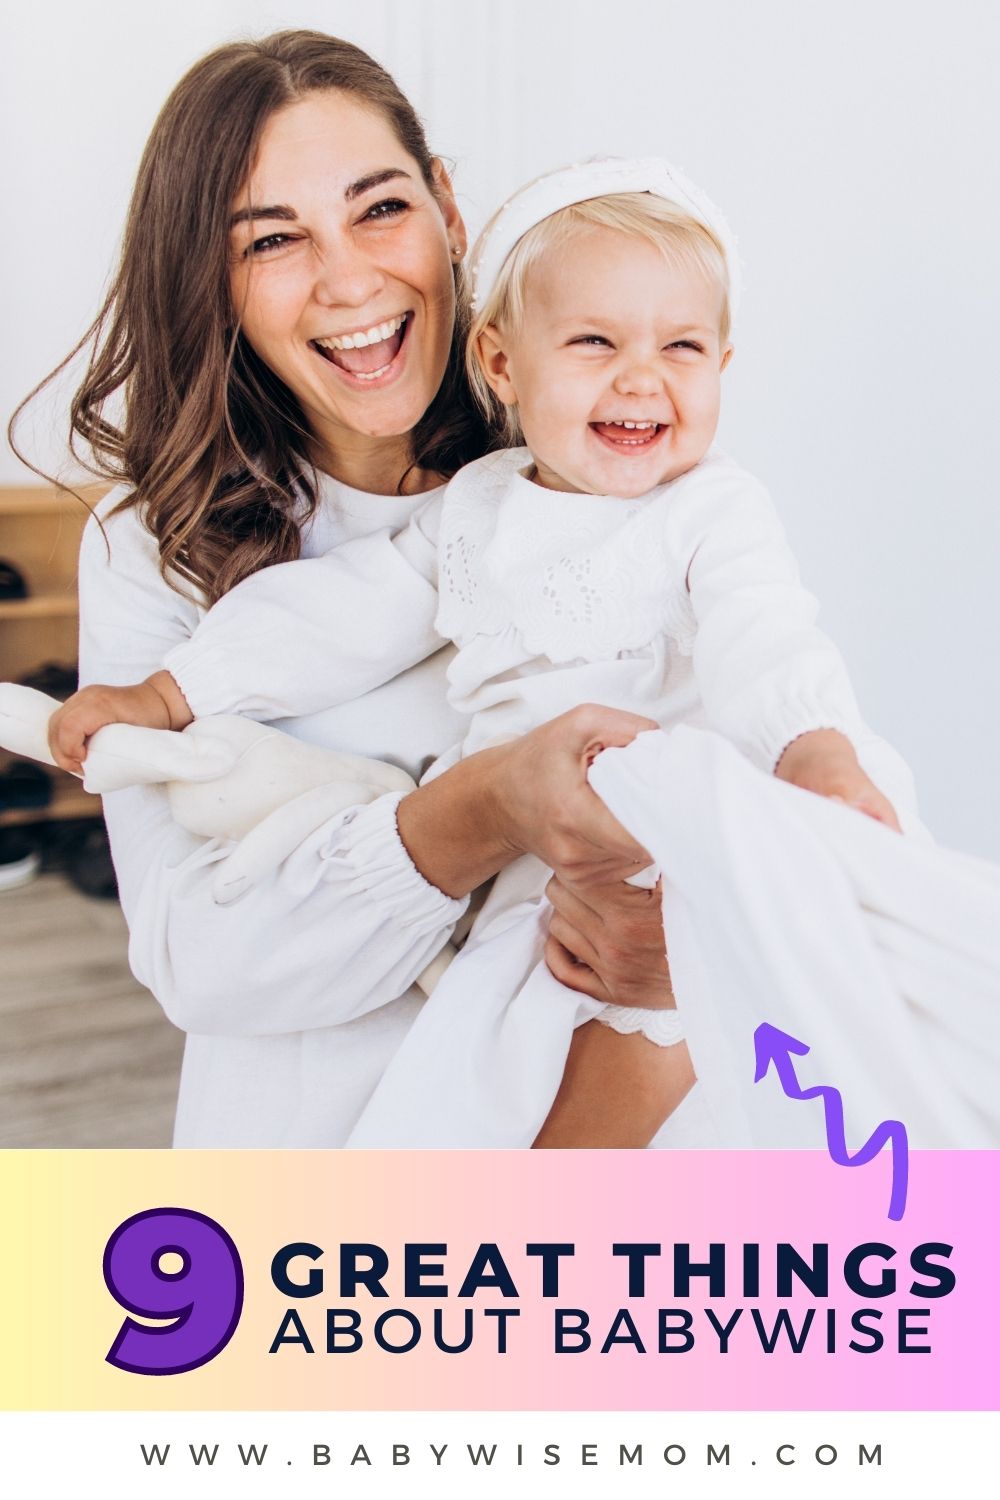 9 great things about Babywise